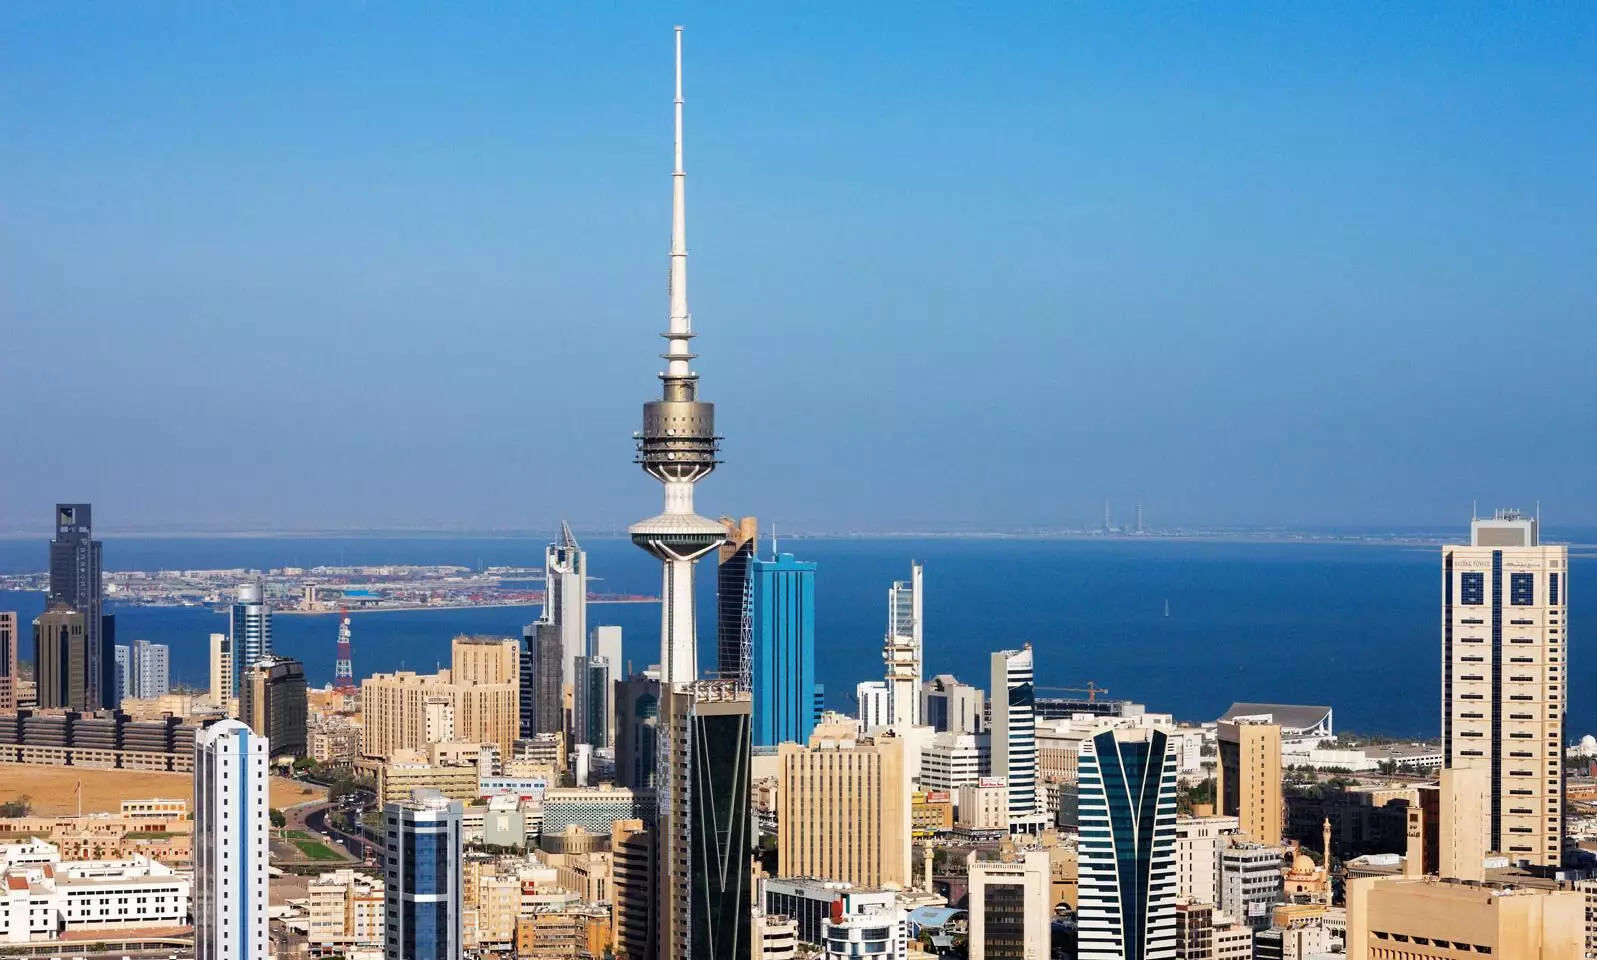 Kuwait to suspend entry of non-Kuwaitis from February 7th